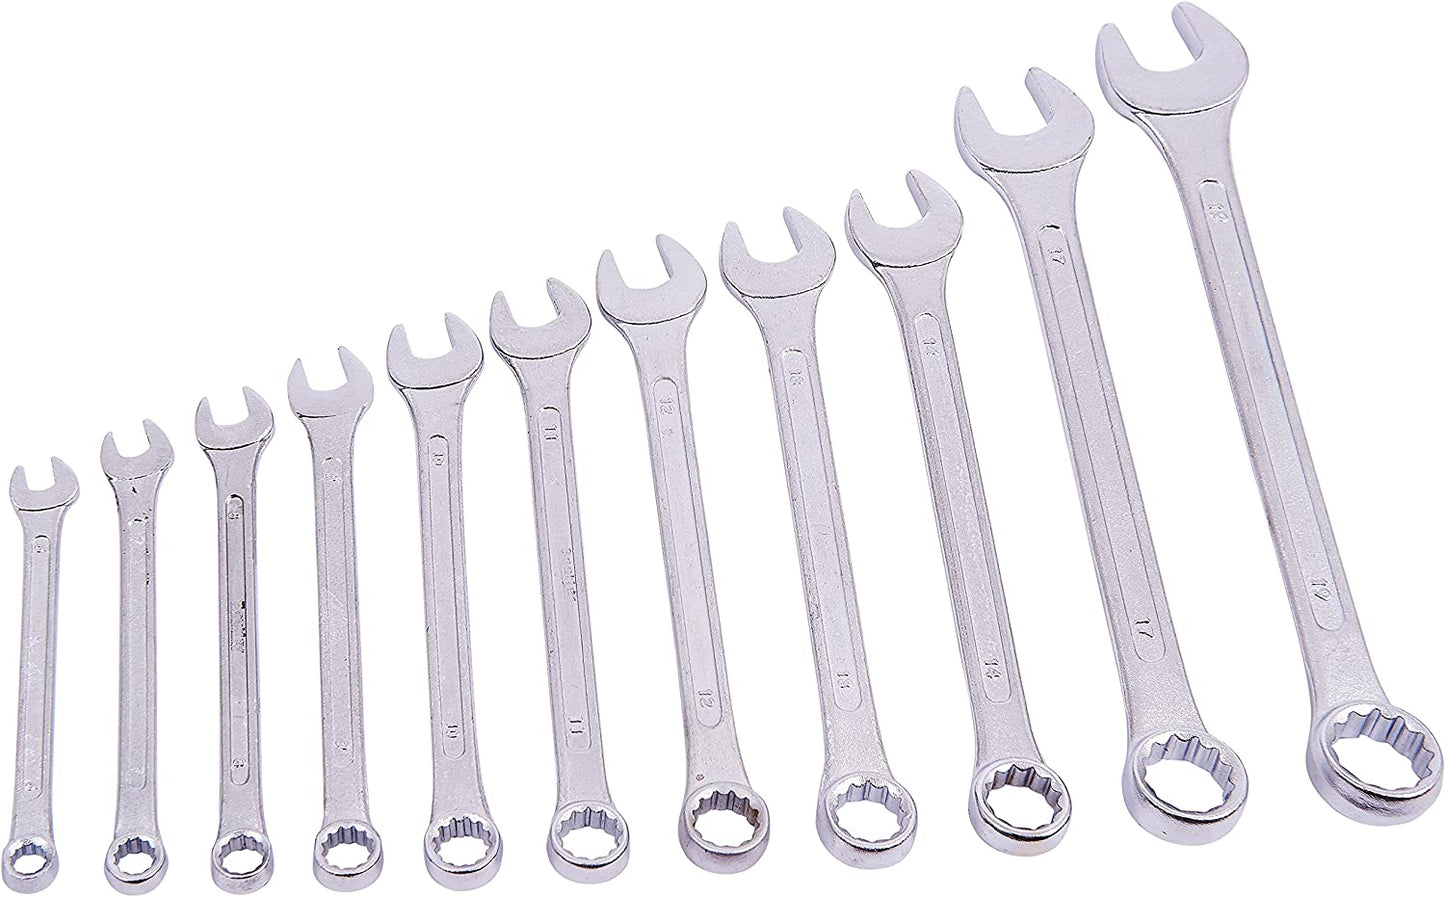 Amtech K0400 Combination Spanner Set, Drop Forged and Chrome Plated Spanners, 6mm to 19mm